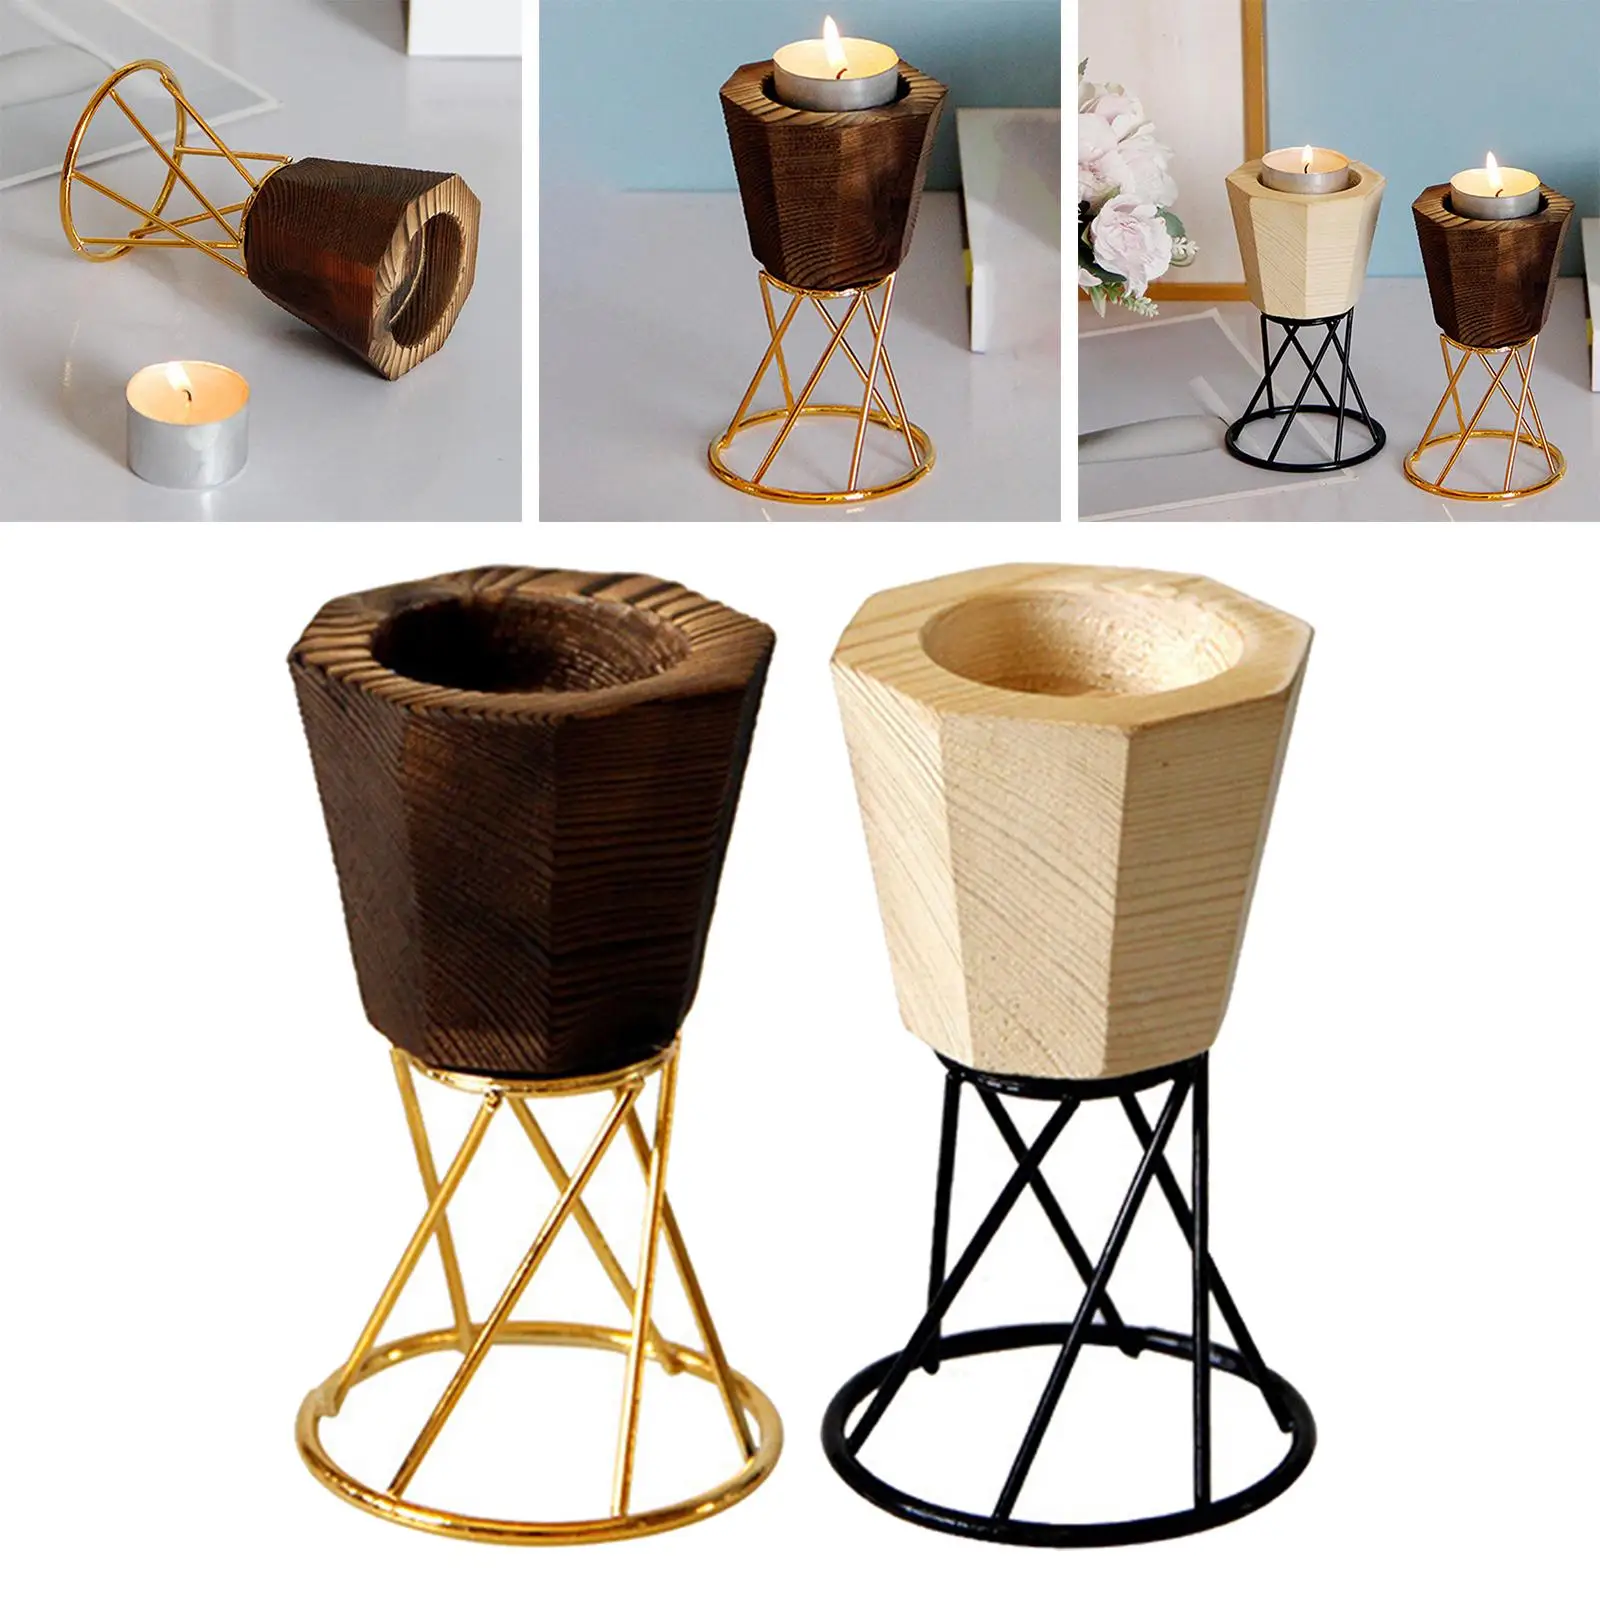 Wooden Candle Holders Tealight Candlestick Living Room Candelabras Candleholders for Fireplace Mantel Hotel Home Farmhouse Party